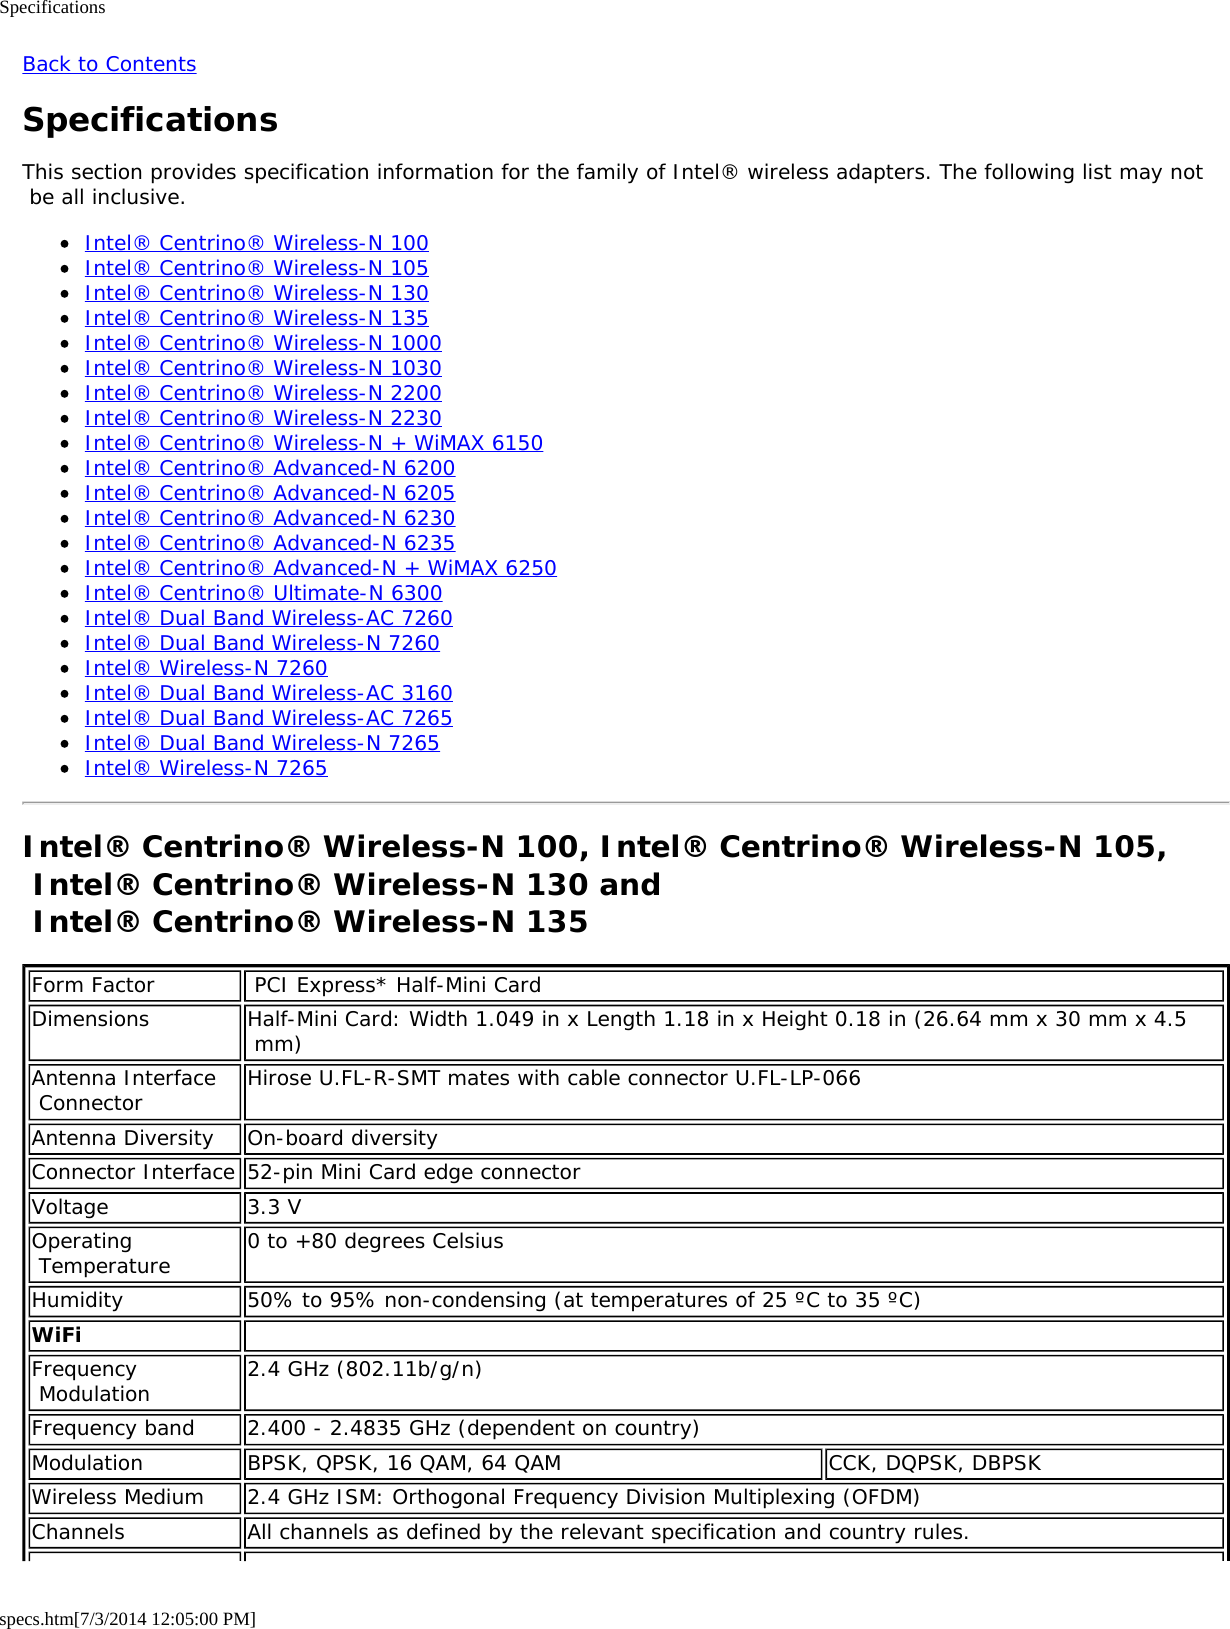 Specificationsspecs.htm[7/3/2014 12:05:00 PM]Back to ContentsSpecificationsThis section provides specification information for the family of Intel® wireless adapters. The following list may not be all inclusive.Intel® Centrino® Wireless-N 100Intel® Centrino® Wireless-N 105Intel® Centrino® Wireless-N 130Intel® Centrino® Wireless-N 135Intel® Centrino® Wireless-N 1000Intel® Centrino® Wireless-N 1030Intel® Centrino® Wireless-N 2200Intel® Centrino® Wireless-N 2230Intel® Centrino® Wireless-N + WiMAX 6150Intel® Centrino® Advanced-N 6200Intel® Centrino® Advanced-N 6205Intel® Centrino® Advanced-N 6230Intel® Centrino® Advanced-N 6235Intel® Centrino® Advanced-N + WiMAX 6250Intel® Centrino® Ultimate-N 6300Intel® Dual Band Wireless-AC 7260Intel® Dual Band Wireless-N 7260Intel® Wireless-N 7260Intel® Dual Band Wireless-AC 3160Intel® Dual Band Wireless-AC 7265Intel® Dual Band Wireless-N 7265Intel® Wireless-N 7265Intel® Centrino® Wireless-N 100, Intel® Centrino® Wireless-N 105, Intel® Centrino® Wireless-N 130 and  Intel® Centrino® Wireless-N 135Form Factor  PCI Express* Half-Mini CardDimensions Half-Mini Card: Width 1.049 in x Length 1.18 in x Height 0.18 in (26.64 mm x 30 mm x 4.5 mm)Antenna Interface Connector Hirose U.FL-R-SMT mates with cable connector U.FL-LP-066Antenna Diversity On-board diversityConnector Interface 52-pin Mini Card edge connectorVoltage 3.3 VOperating Temperature 0 to +80 degrees CelsiusHumidity 50% to 95% non-condensing (at temperatures of 25 ºC to 35 ºC)WiFi  Frequency Modulation 2.4 GHz (802.11b/g/n)Frequency band 2.400 - 2.4835 GHz (dependent on country)Modulation BPSK, QPSK, 16 QAM, 64 QAM CCK, DQPSK, DBPSKWireless Medium 2.4 GHz ISM: Orthogonal Frequency Division Multiplexing (OFDM)Channels All channels as defined by the relevant specification and country rules.